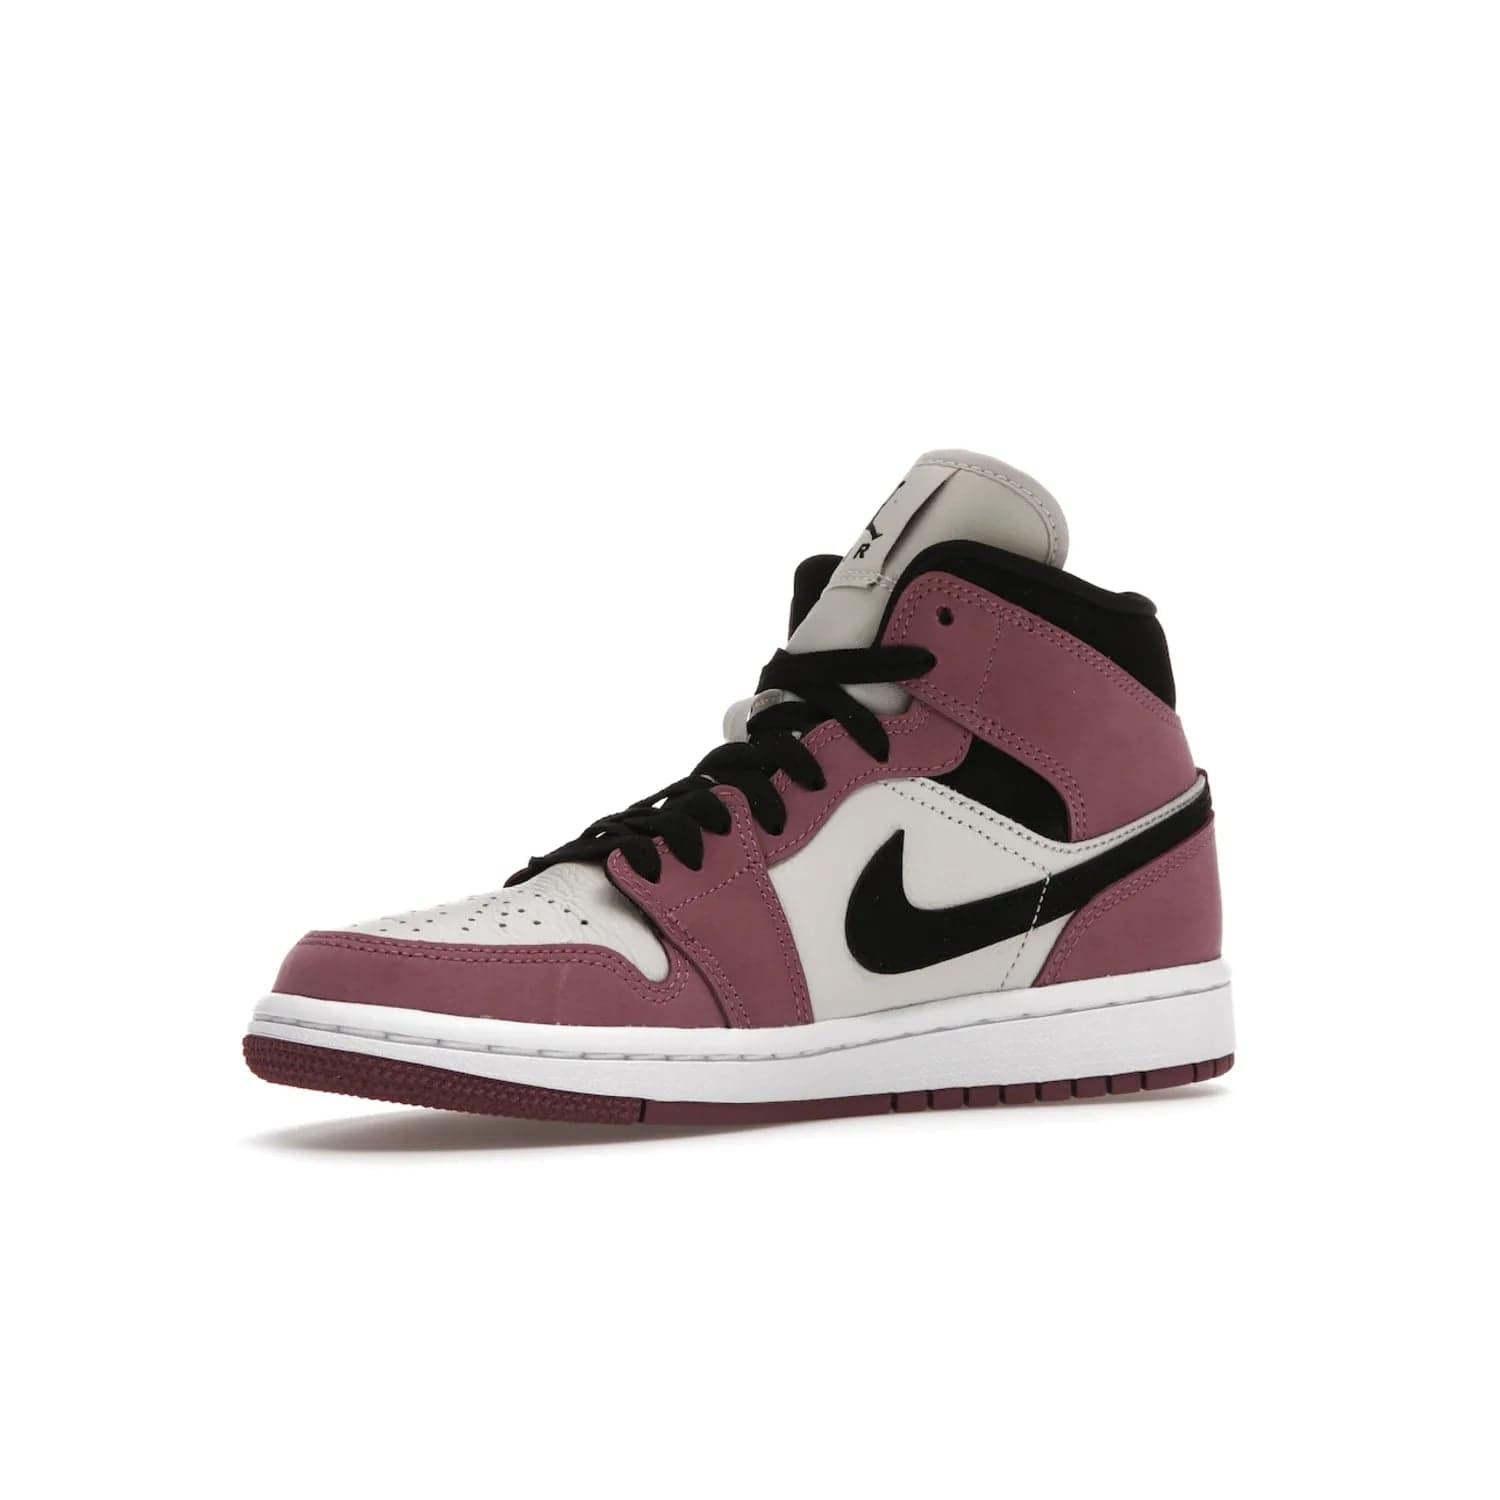 Jordan 1 Mid SE Light Mulberry (Women's) - Image 16 - Only at www.BallersClubKickz.com - Classic style meets performance with the Air Jordan 1 Mid Light Mulberry (Women's). Sleek leather overlays and light bone detailing bring out the best of this classic sneaker, perfect for the active woman on-the-go. Available March 2022.